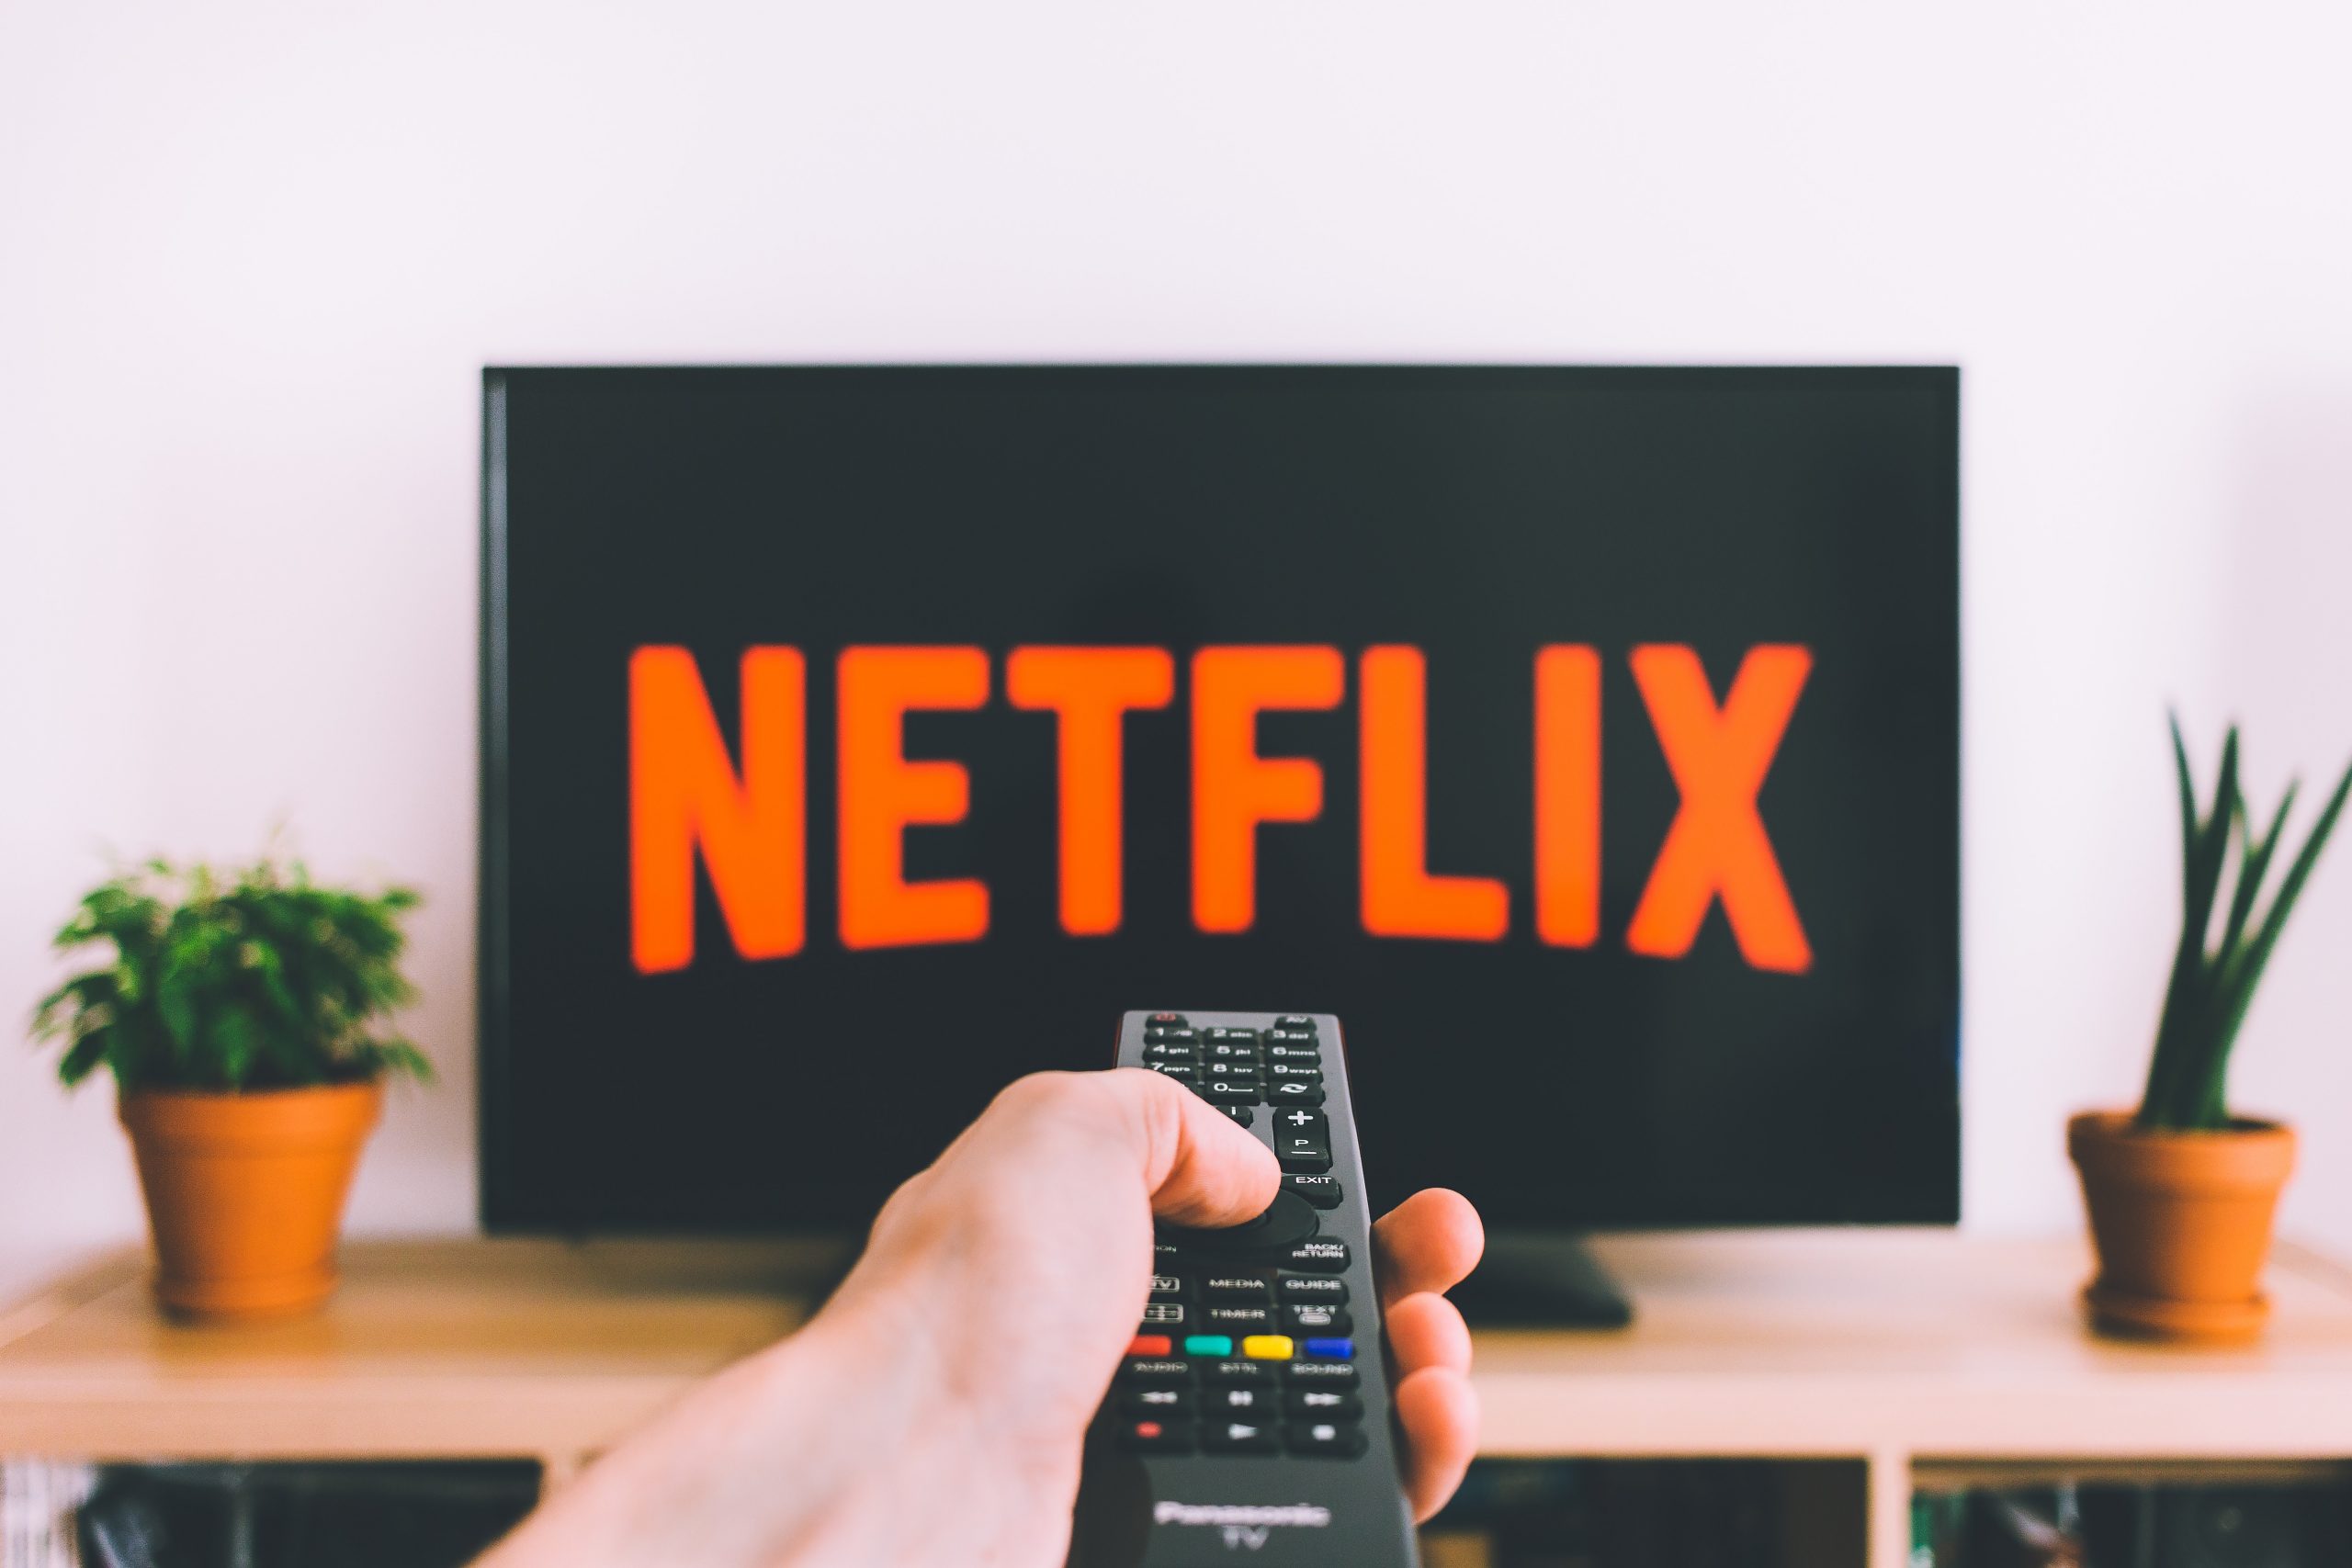 Netflix streaming wars fuel record in UK, Warner Music Group Tops $1.25 Billion and other top news